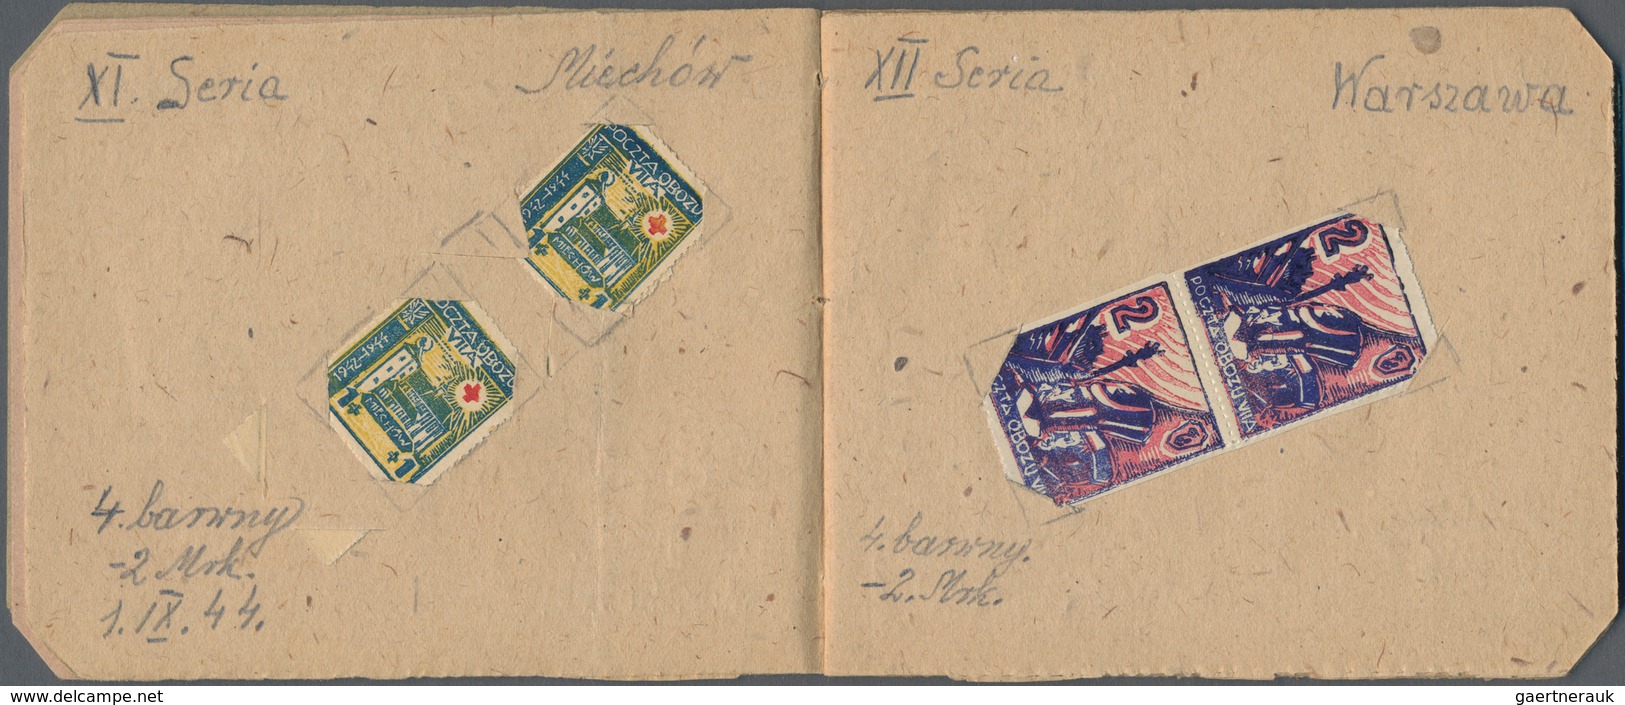 01578 Polen - Lagerpost: Murnau: 1945: Stamp booklet of the Polish Post in the OFLAG Murnau, 18 pages with